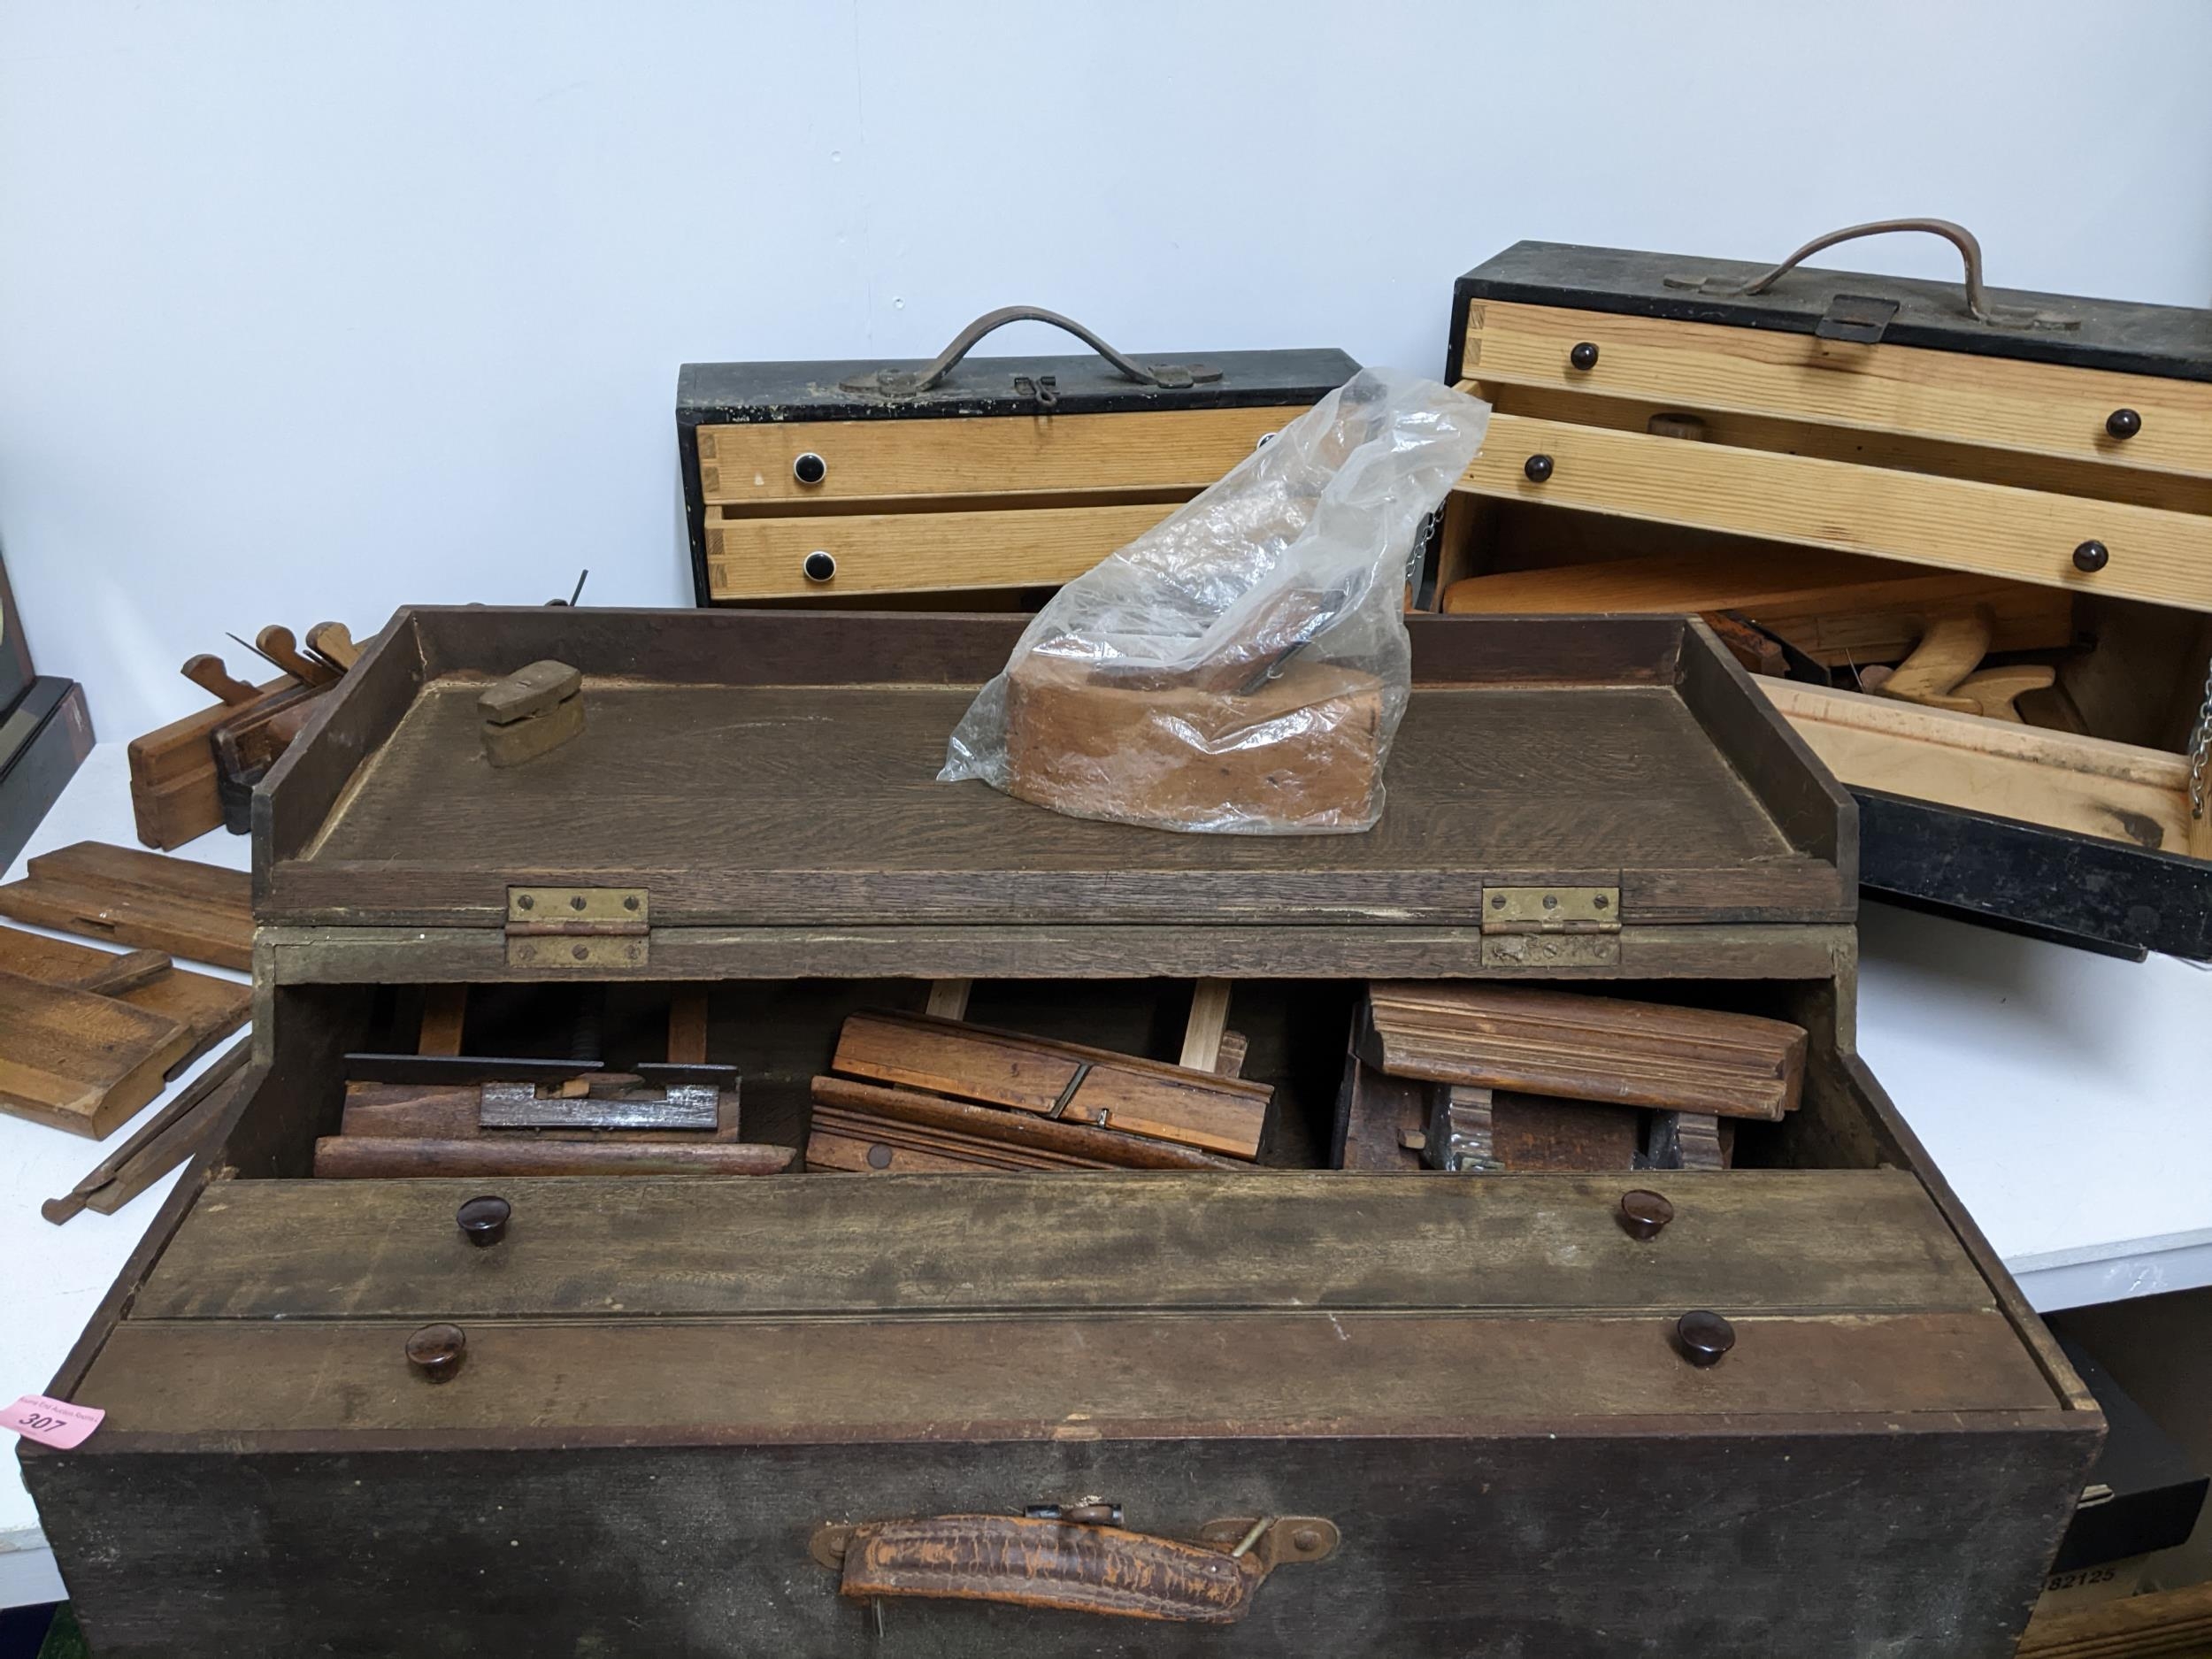 Three early 20th century wooden tool boxes containing various wood working planes and other moulding